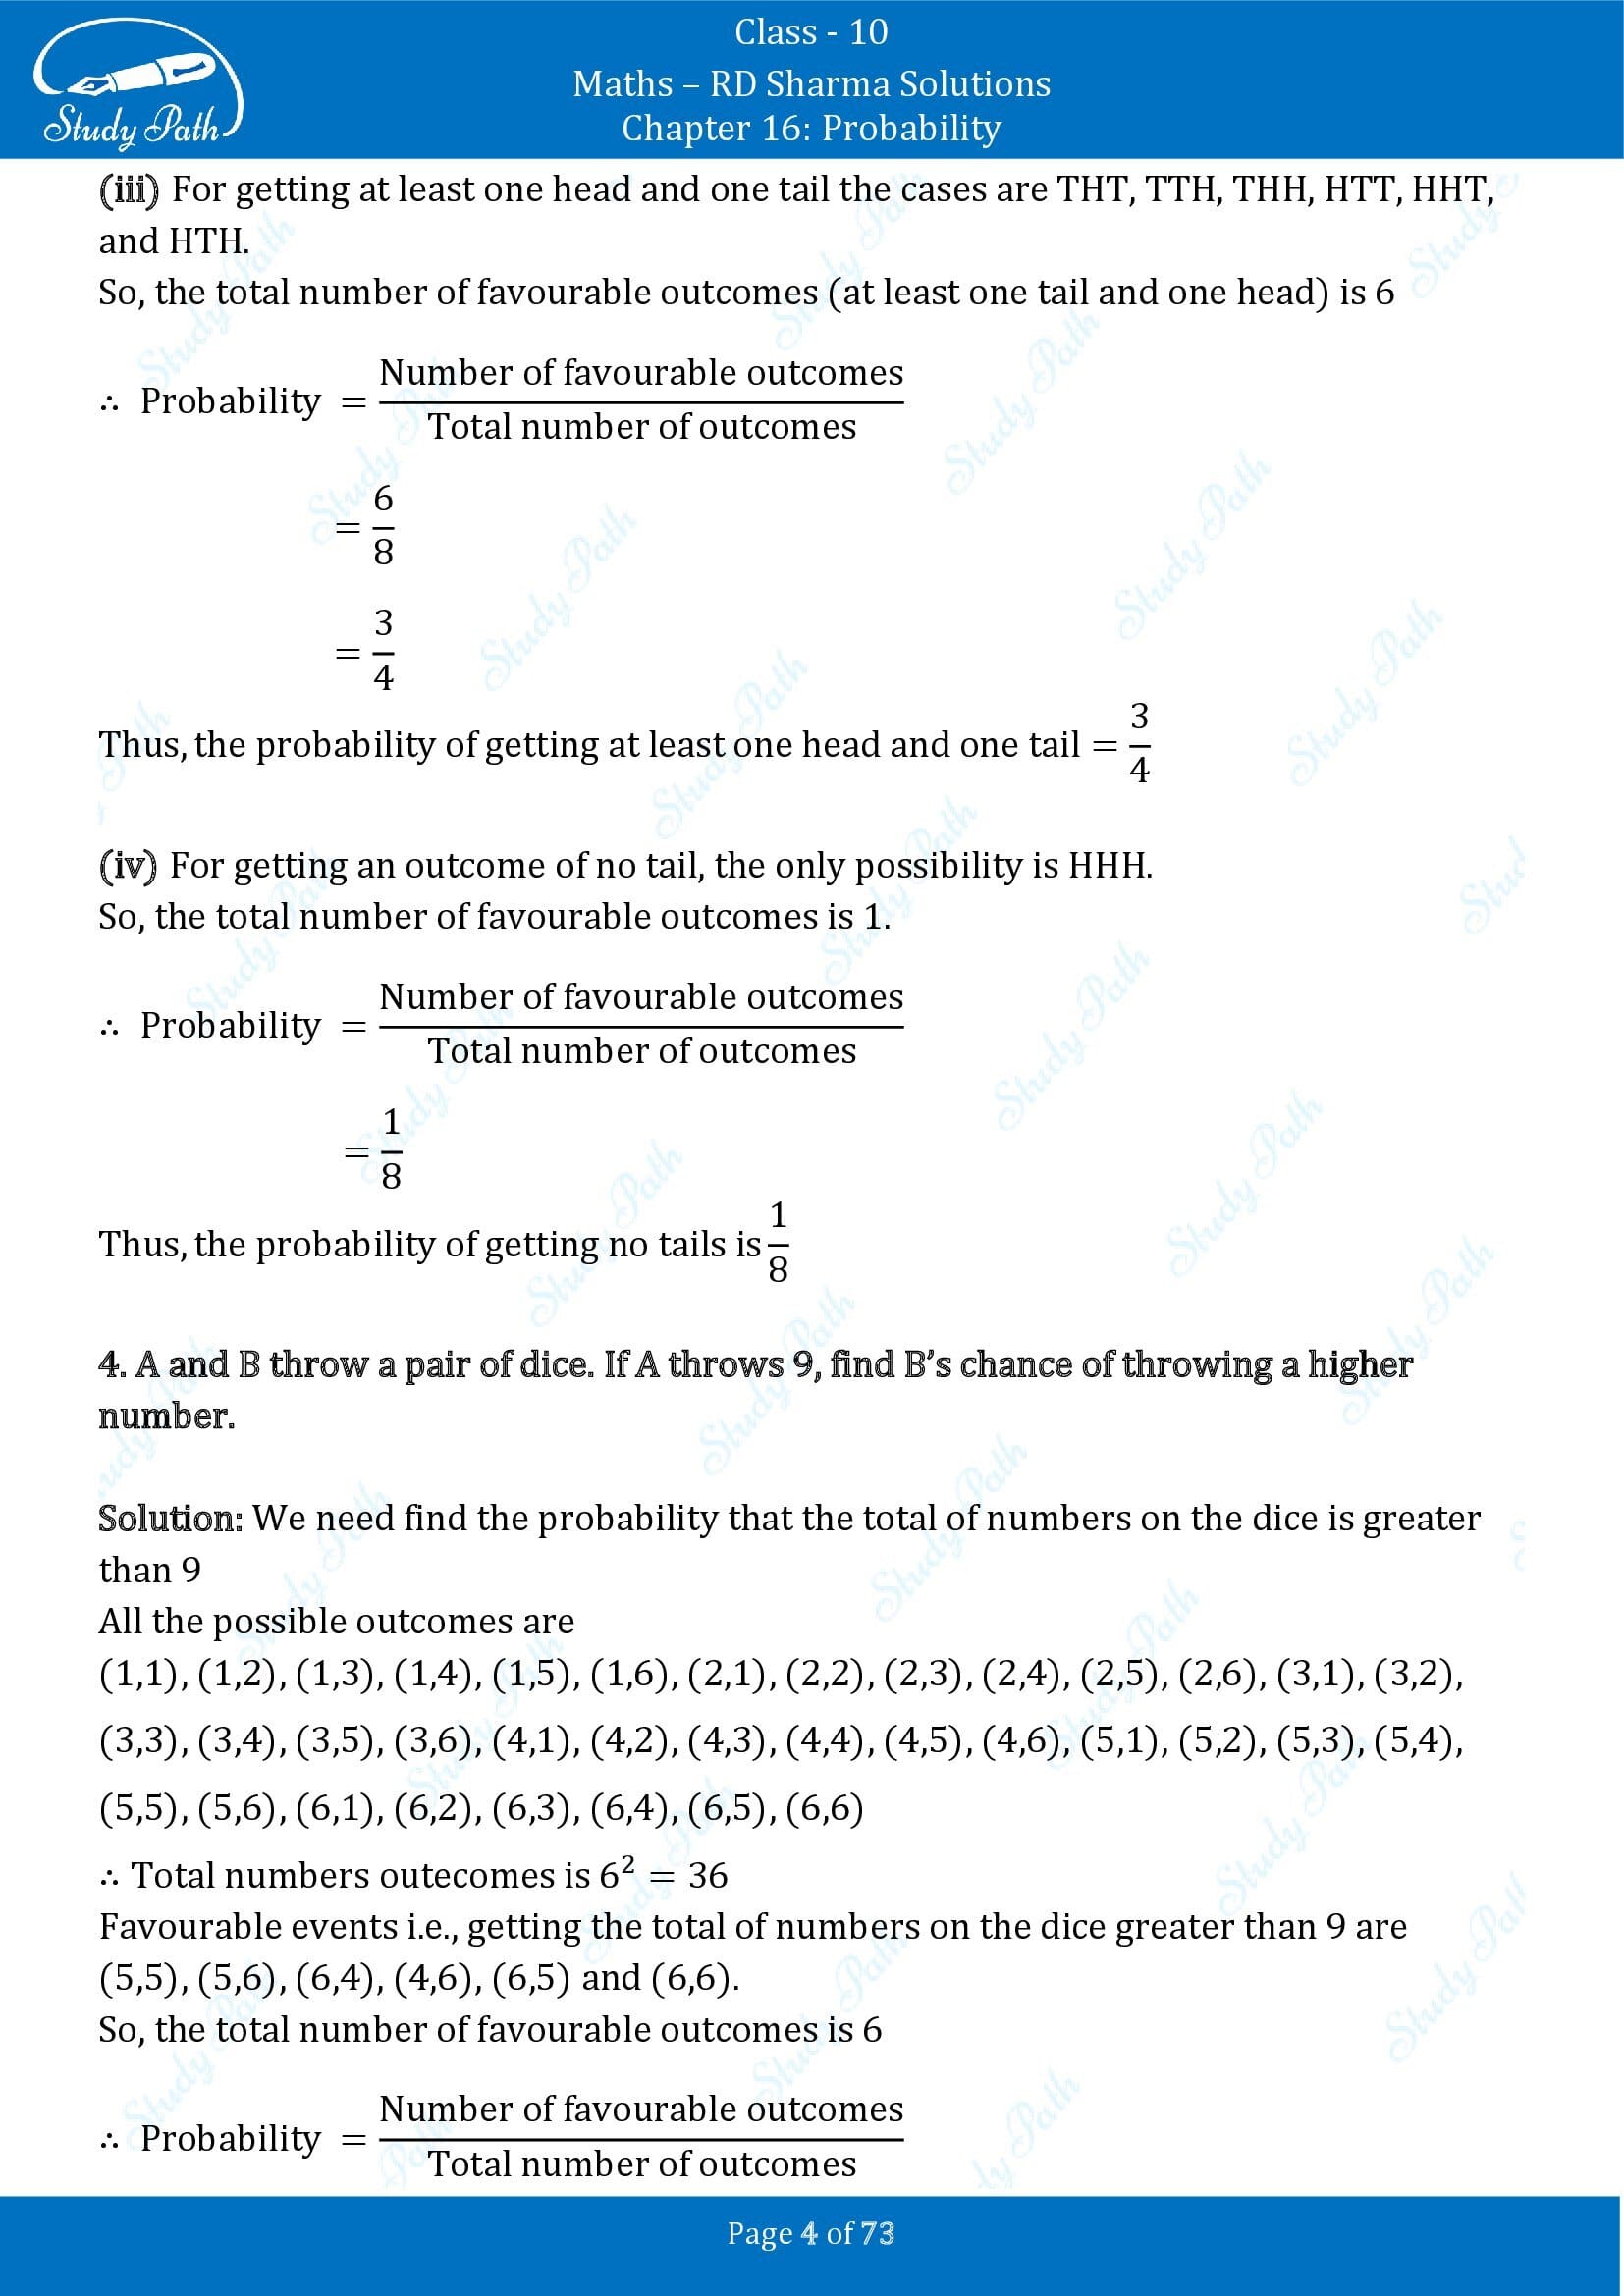 RD Sharma Solutions Class 10 Chapter 16 Probability Exercise 16.1 00004